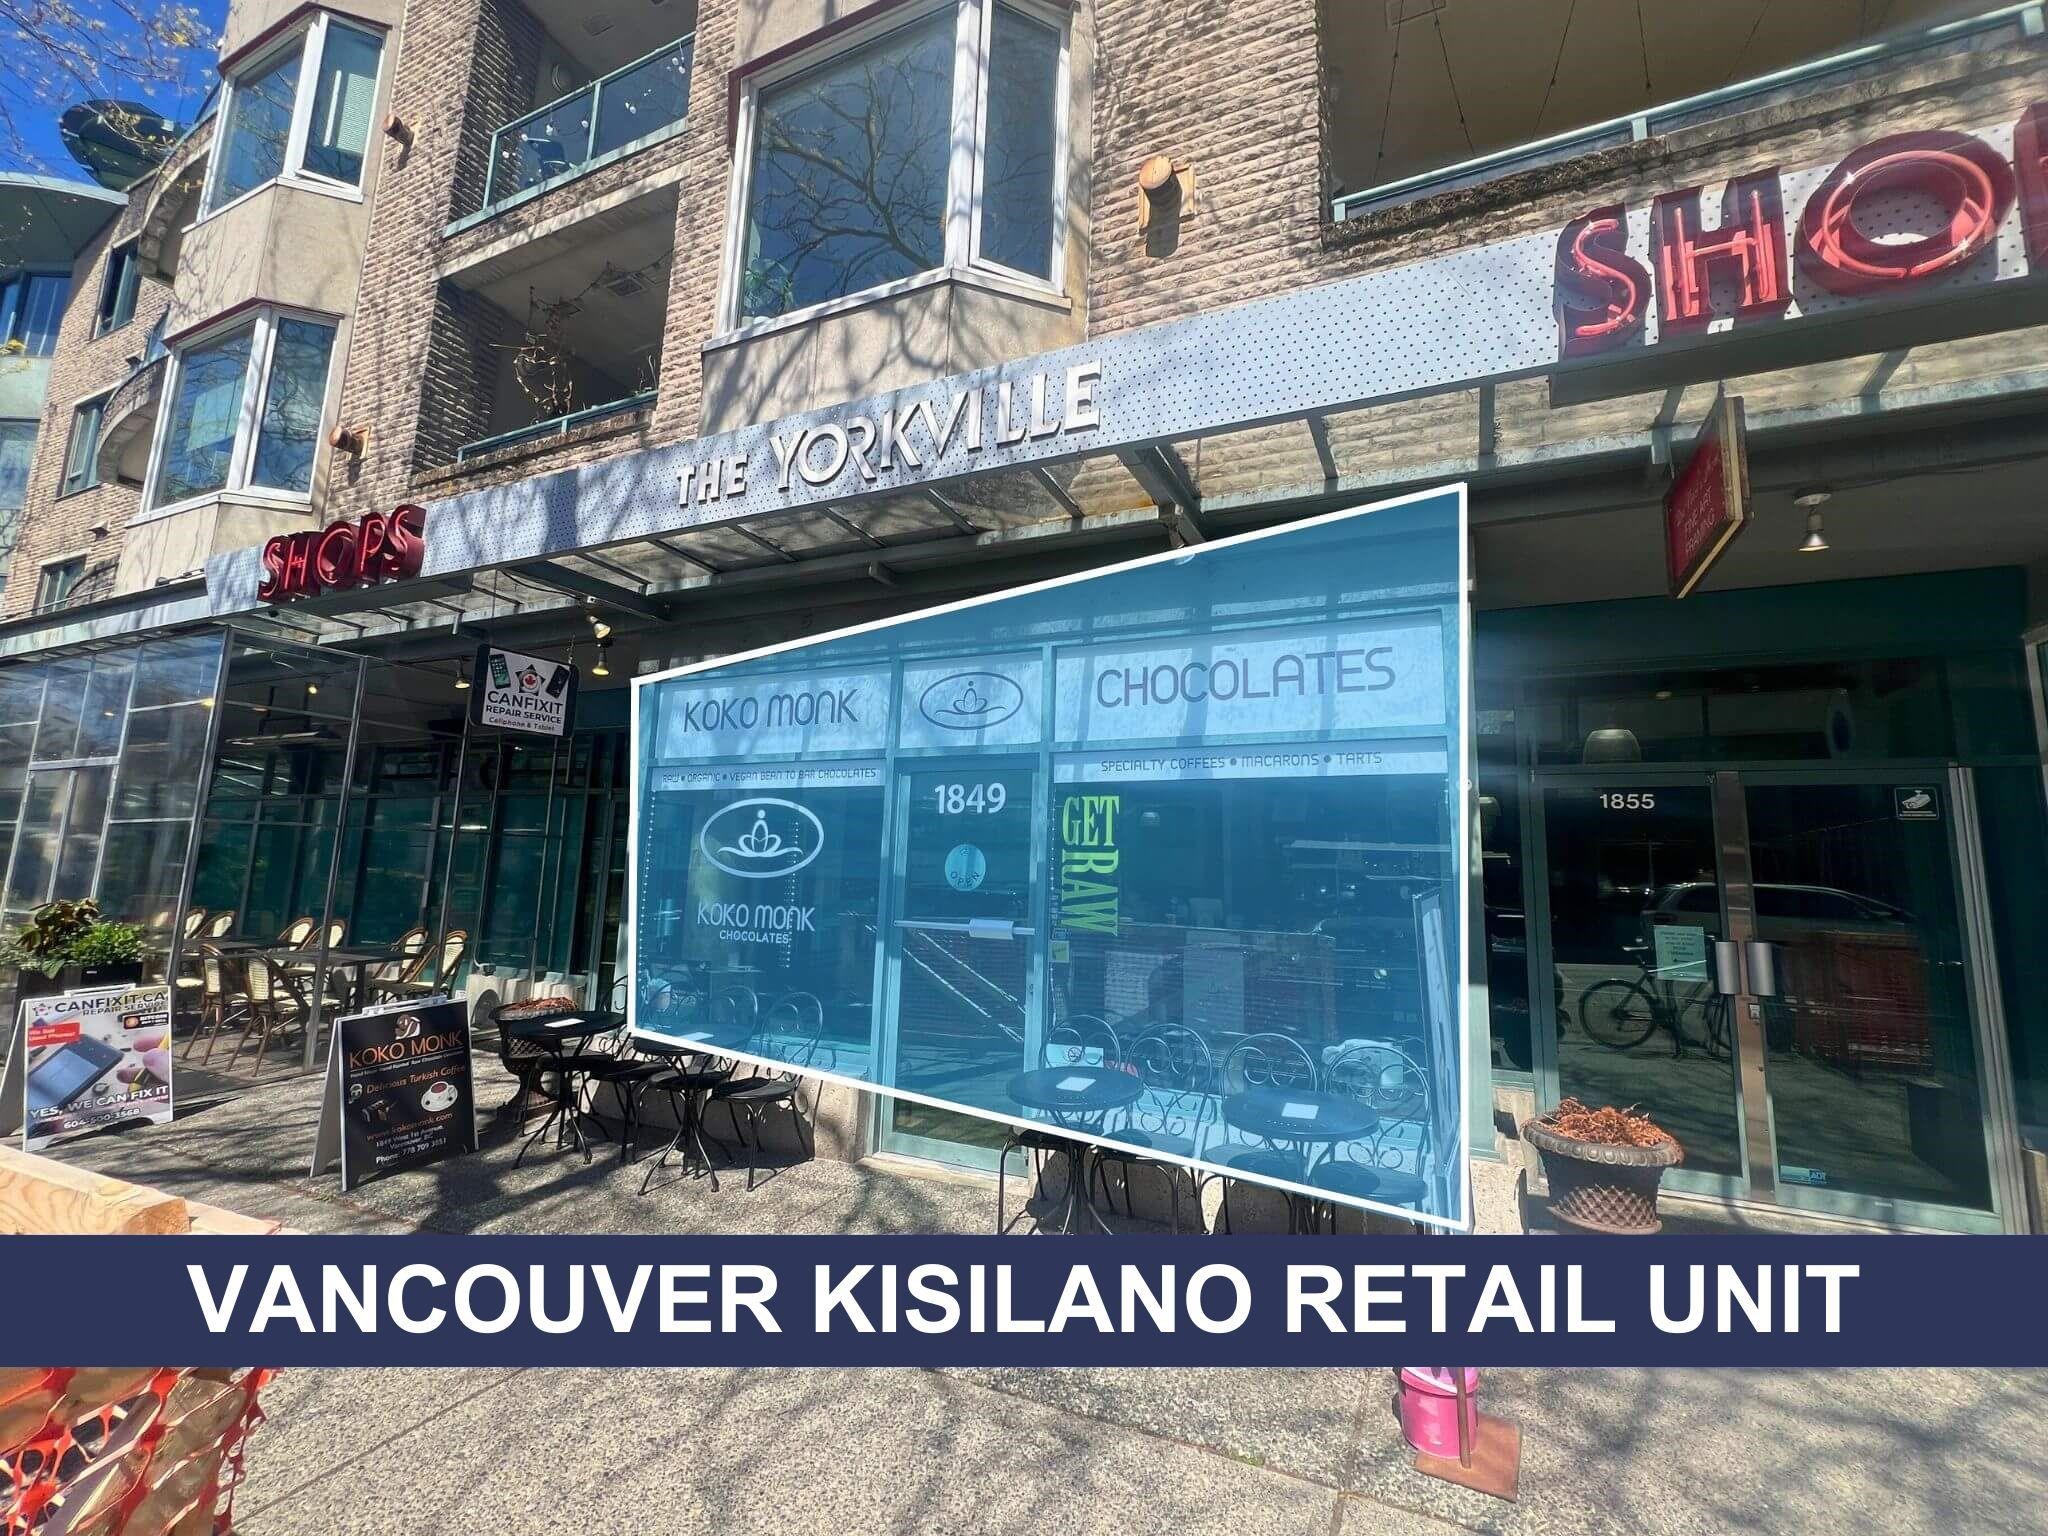 Kitsilano Land Commercial for sale:    (Listed 6800-05-11)